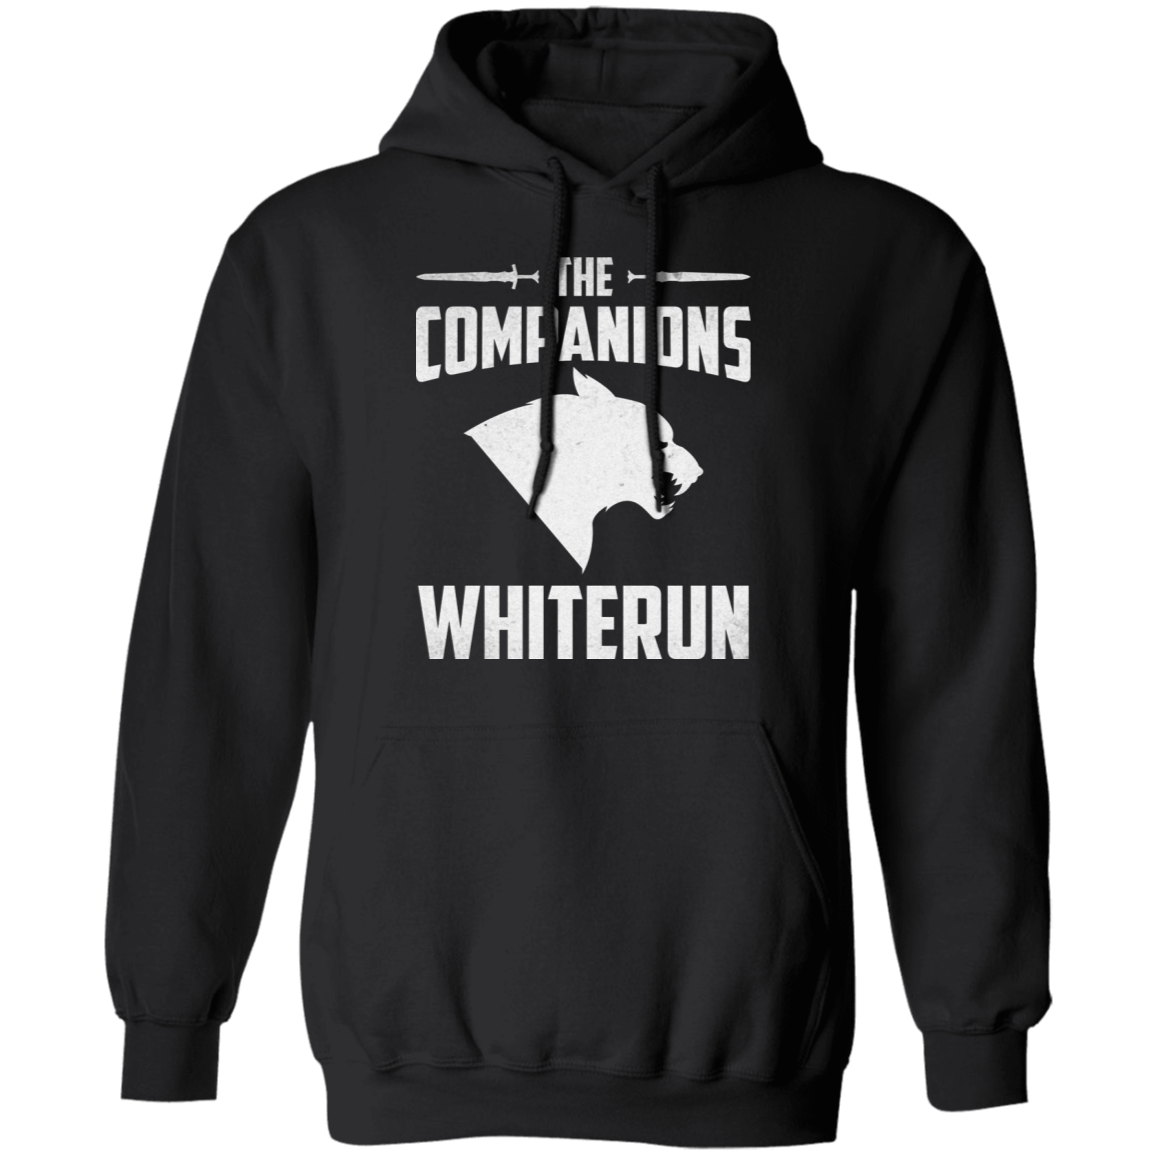 Get your The Companions Whiterun 2 Hoodie now!